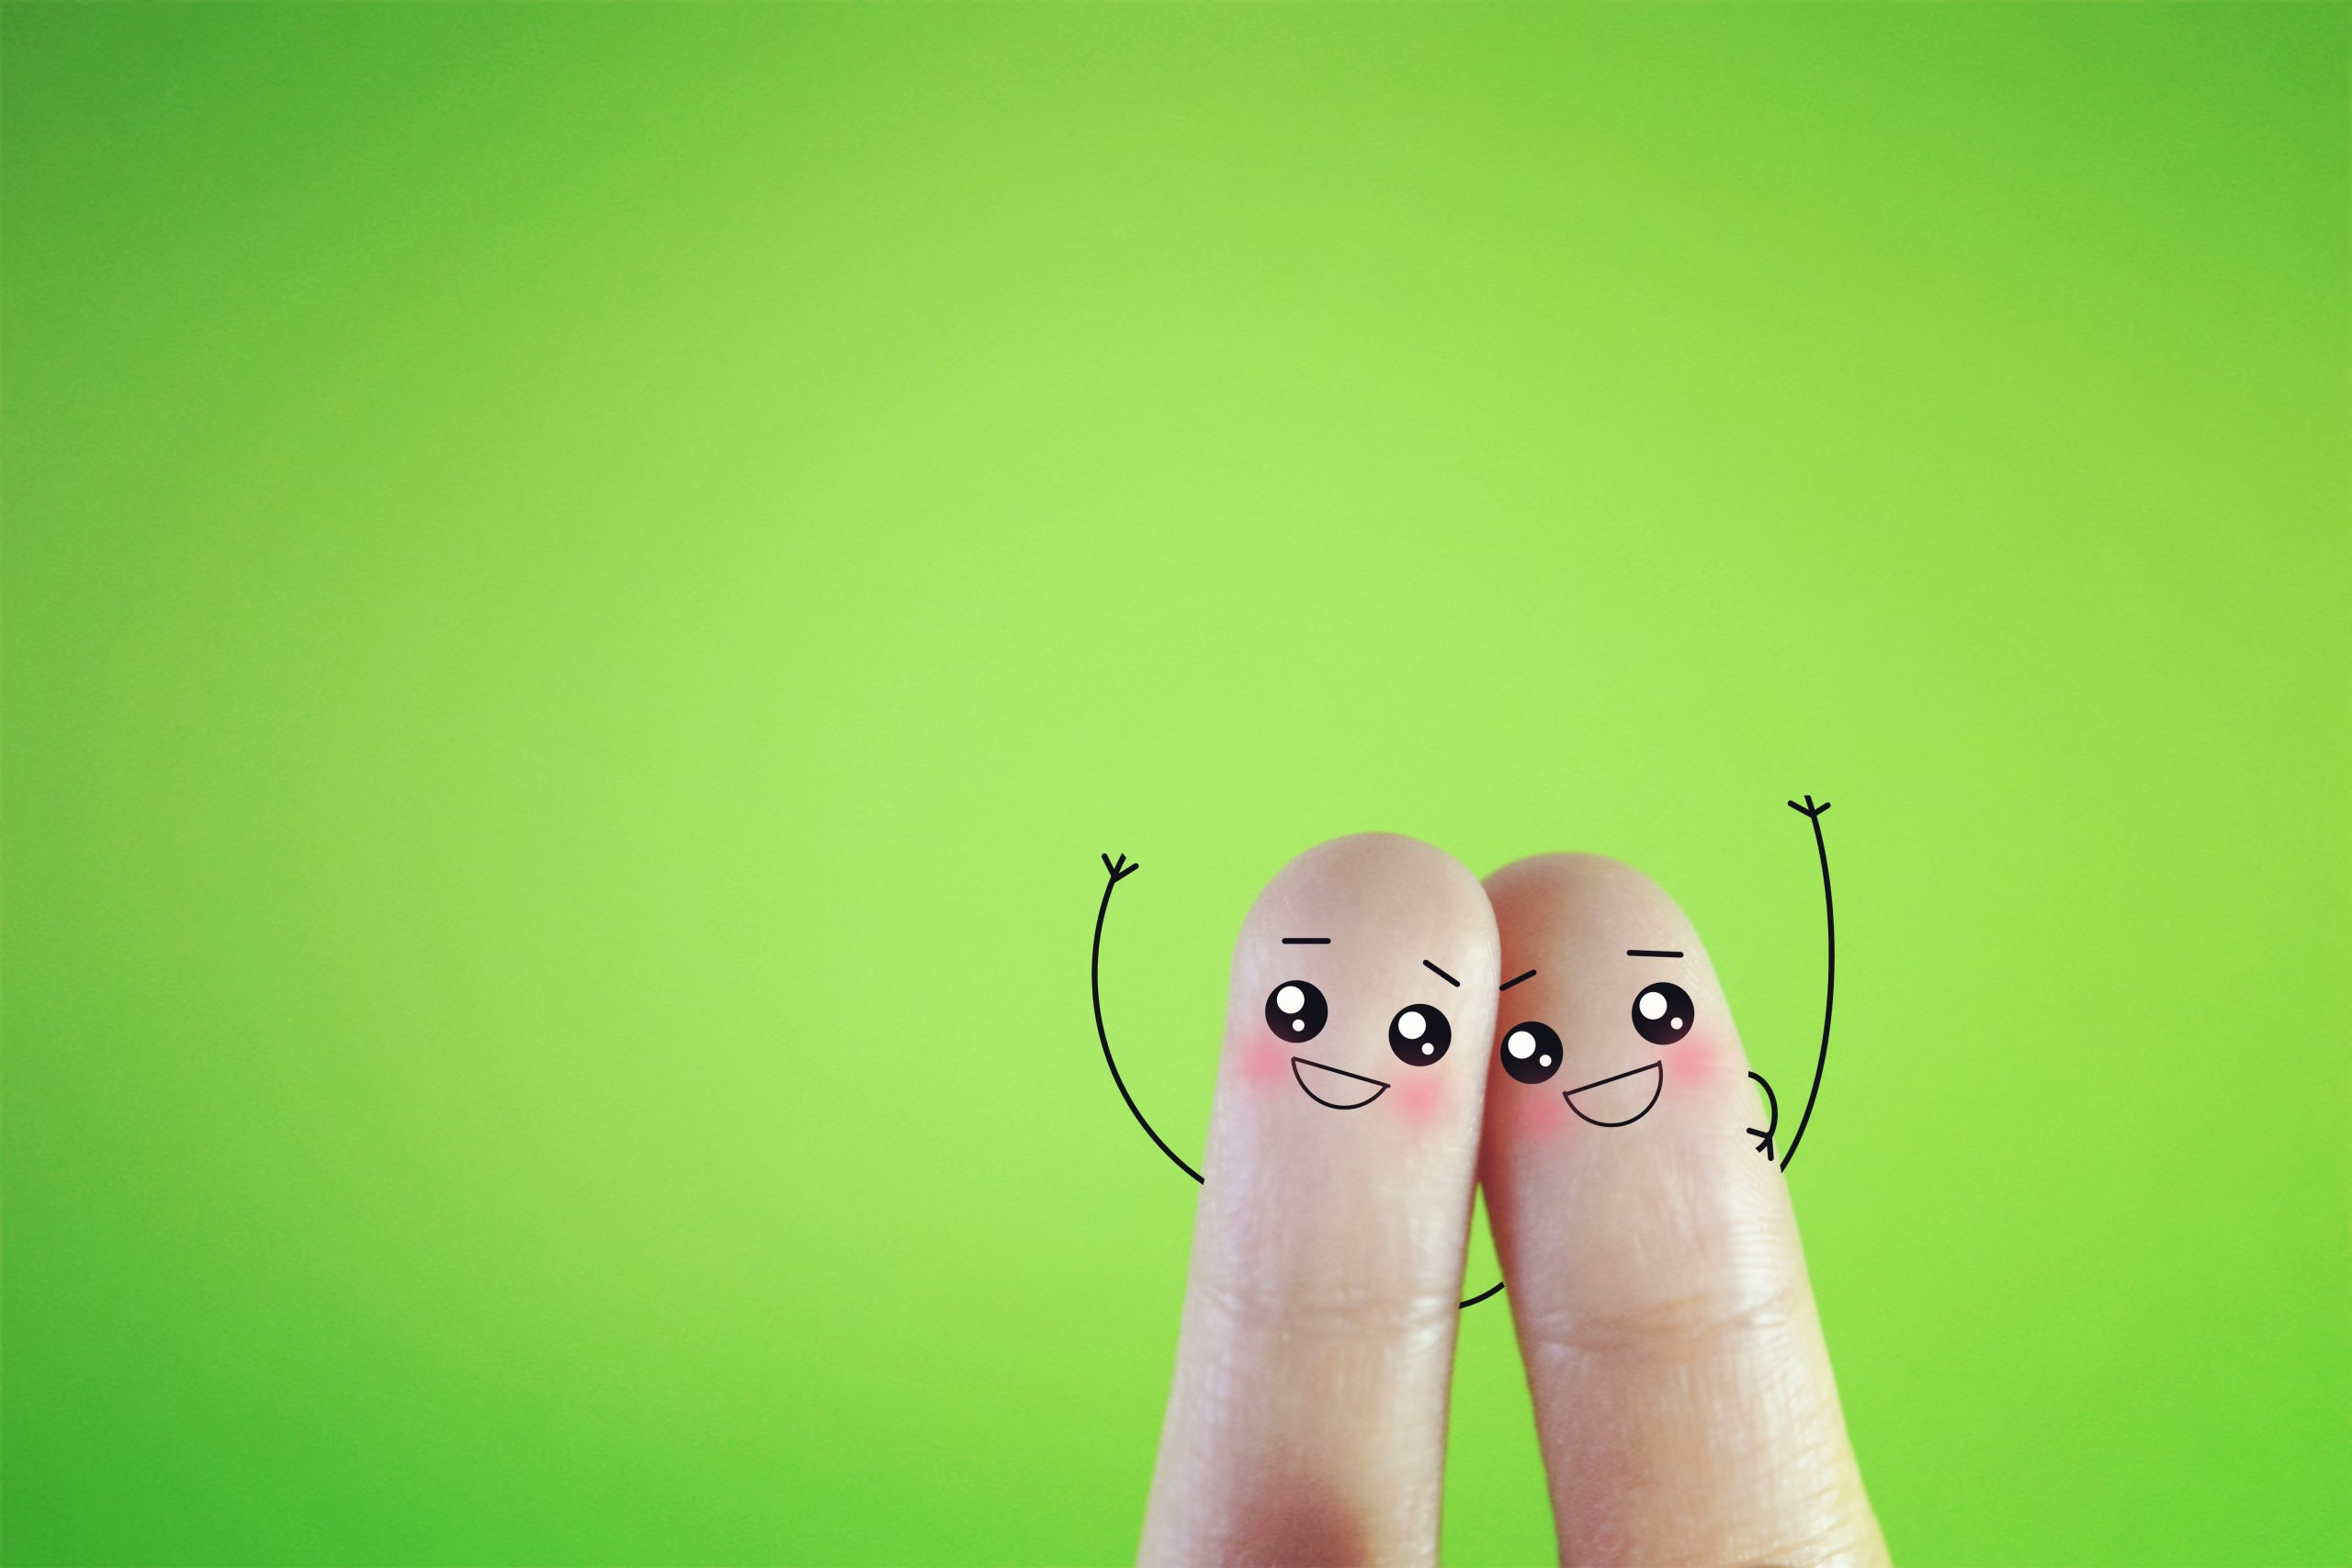 Two,Fingers,Decorated,As,Two,Happy,Friends,On,Green,Background.